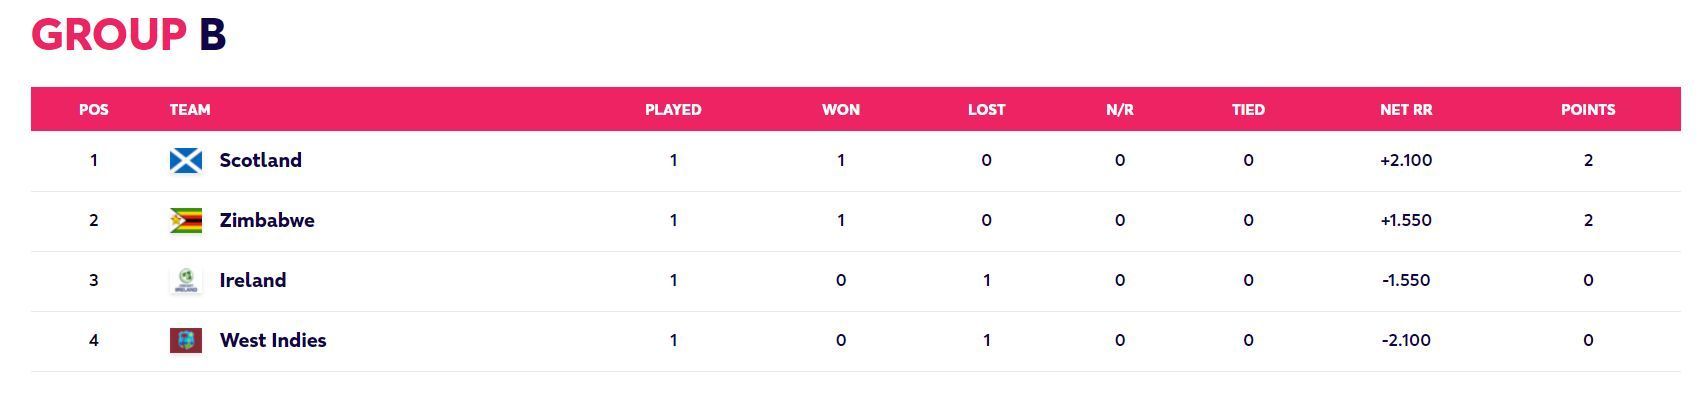 Updated Points Table after Match 4 (Image Courtesy: www.t20worldcup.com)